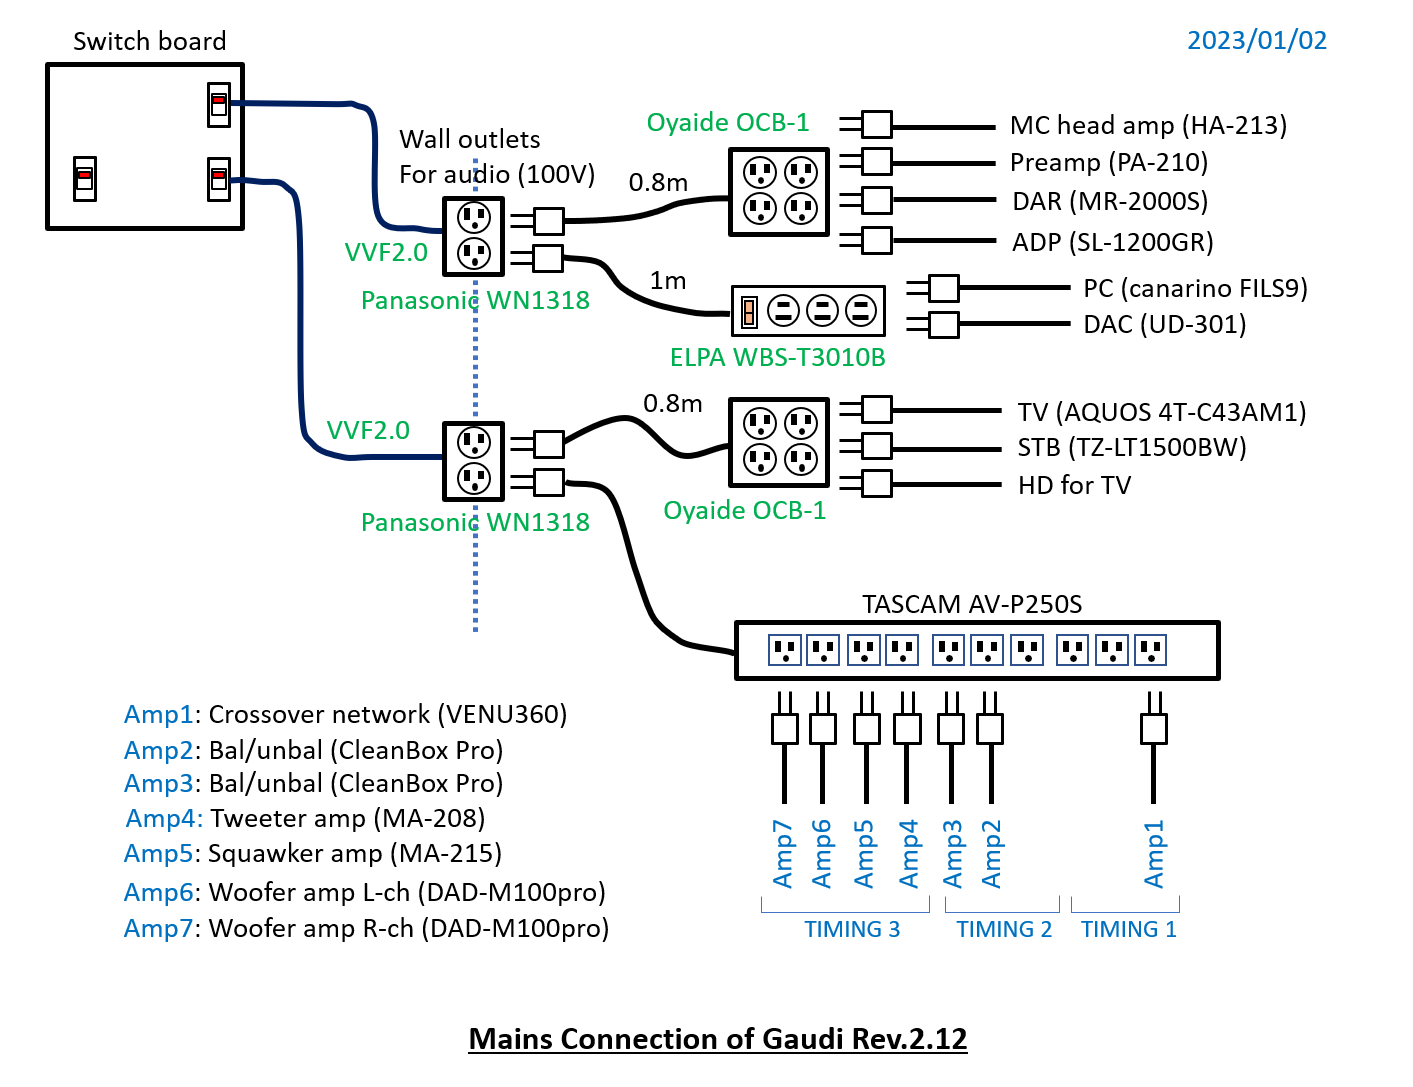 Mains connection of Gaudi R2.11